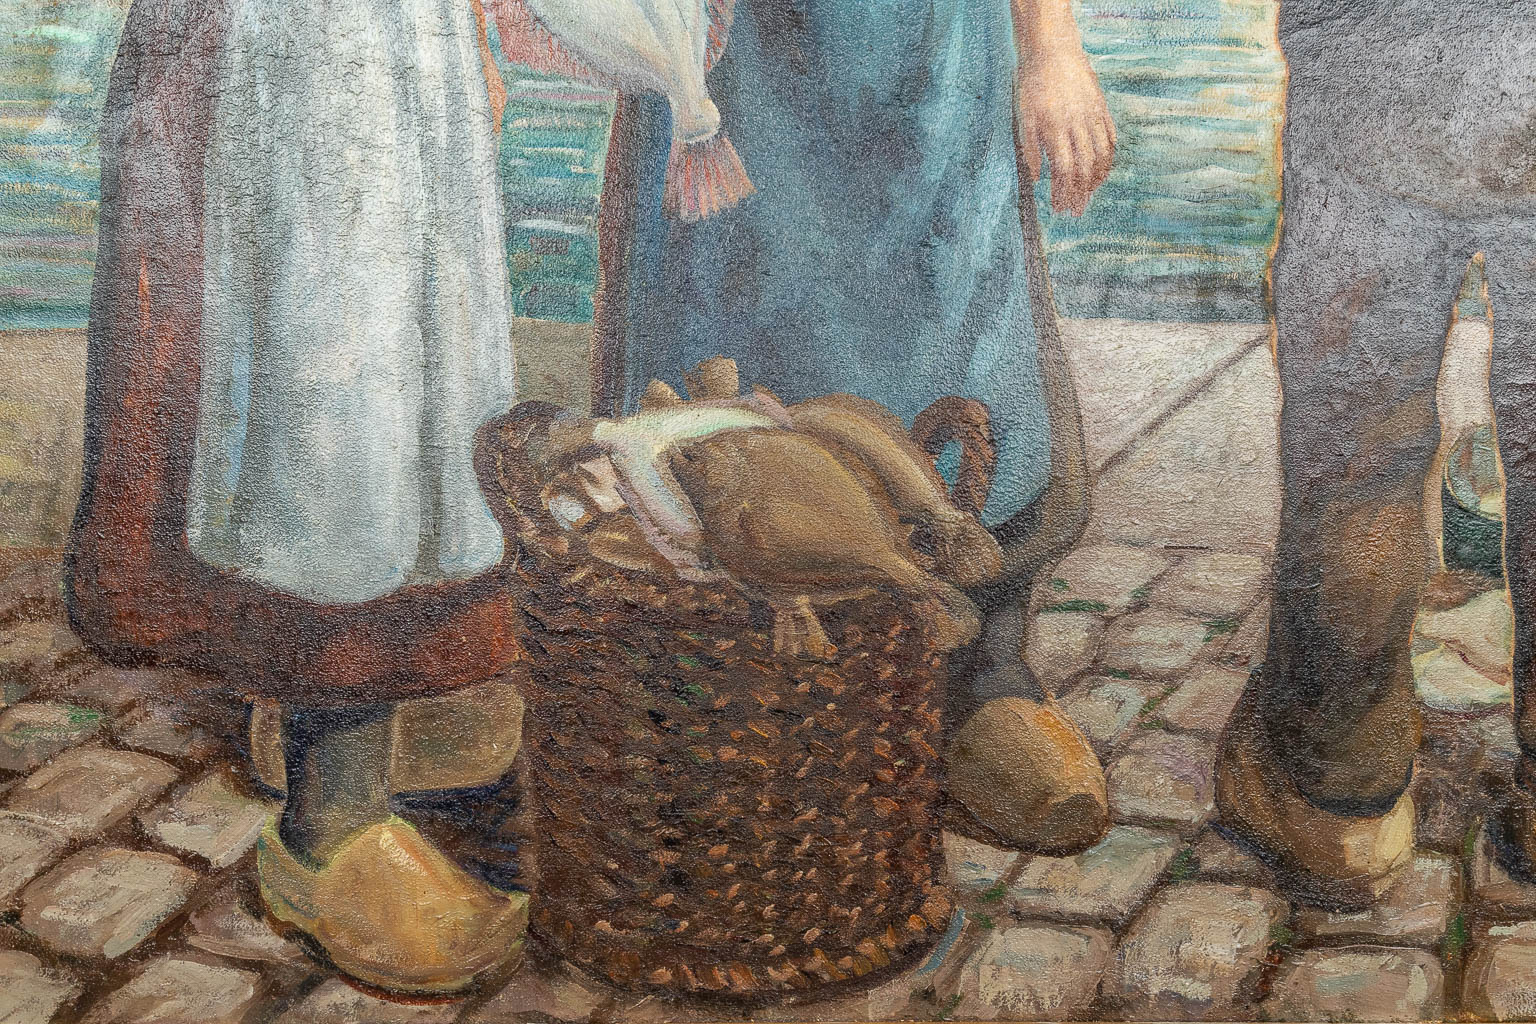 Robert VANHESTE (1913-2002) 'Fish sellers in Oostende' a painting, oil on canvas. (170 x 120 cm)